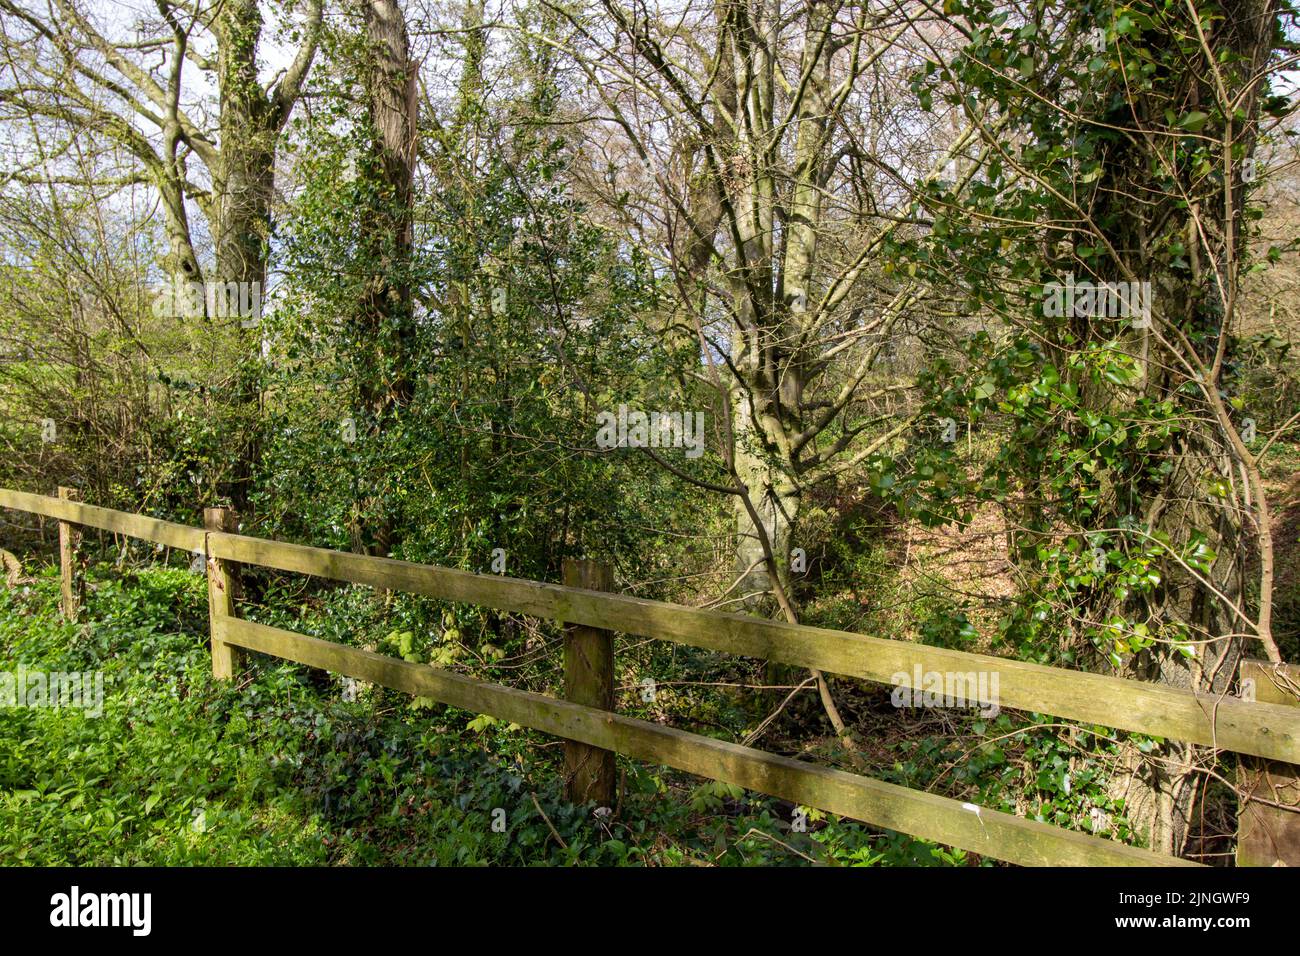 bucolic winter Devon copse of trees with a two bar wooden fence, hazy blue sky and long evening shadows Stock Photo